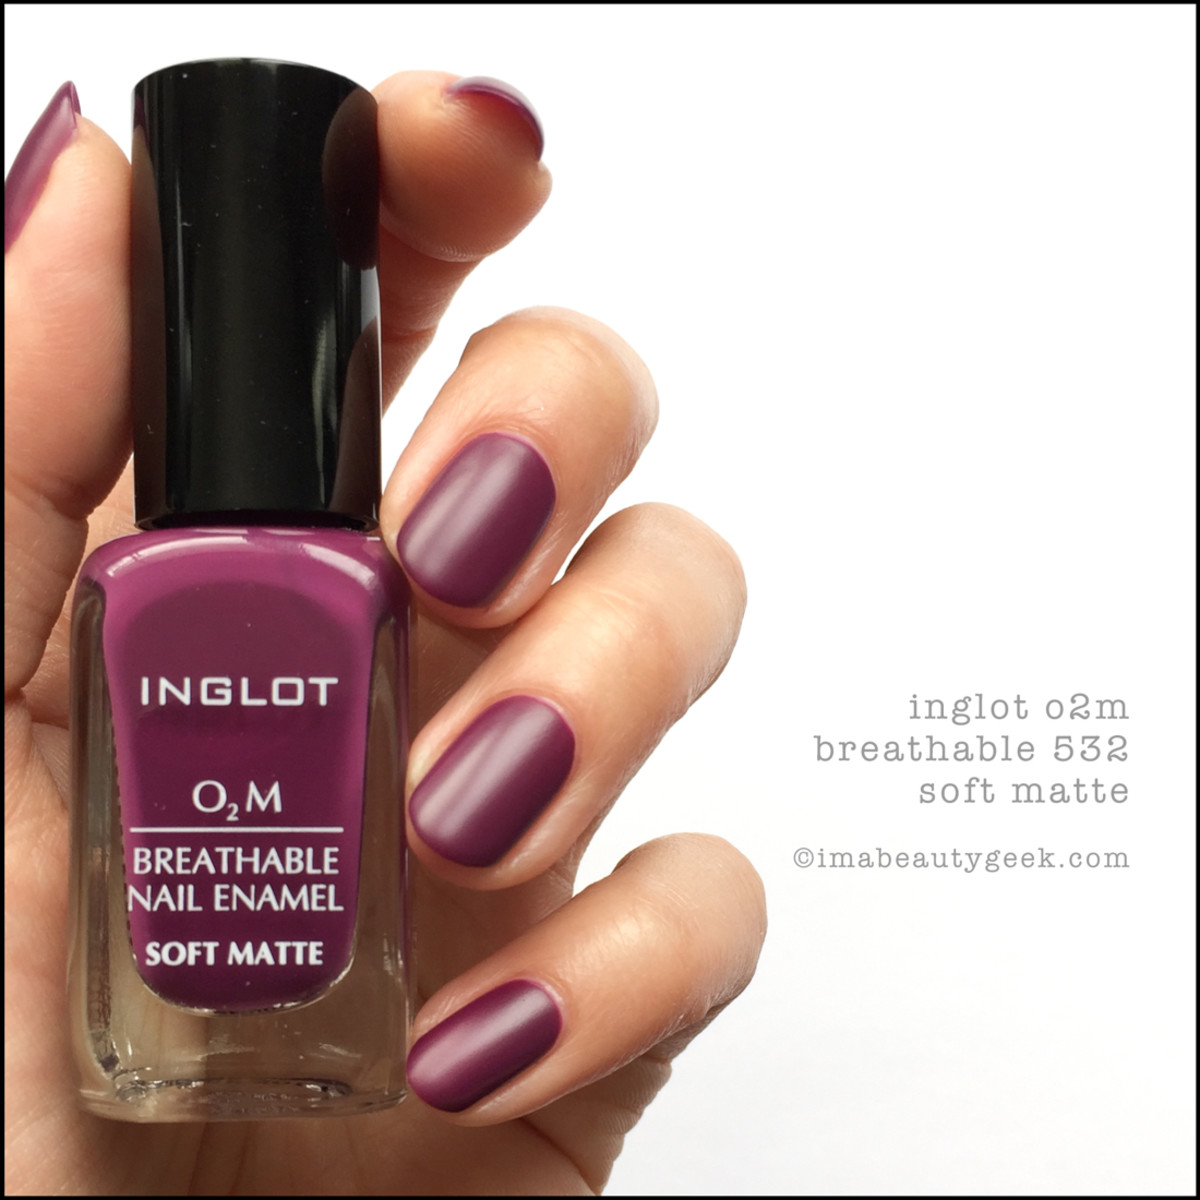 INGLOT O2M BREATHABLE NAIL ENAMEL SWATCHES REVIEW - Beautygeeks